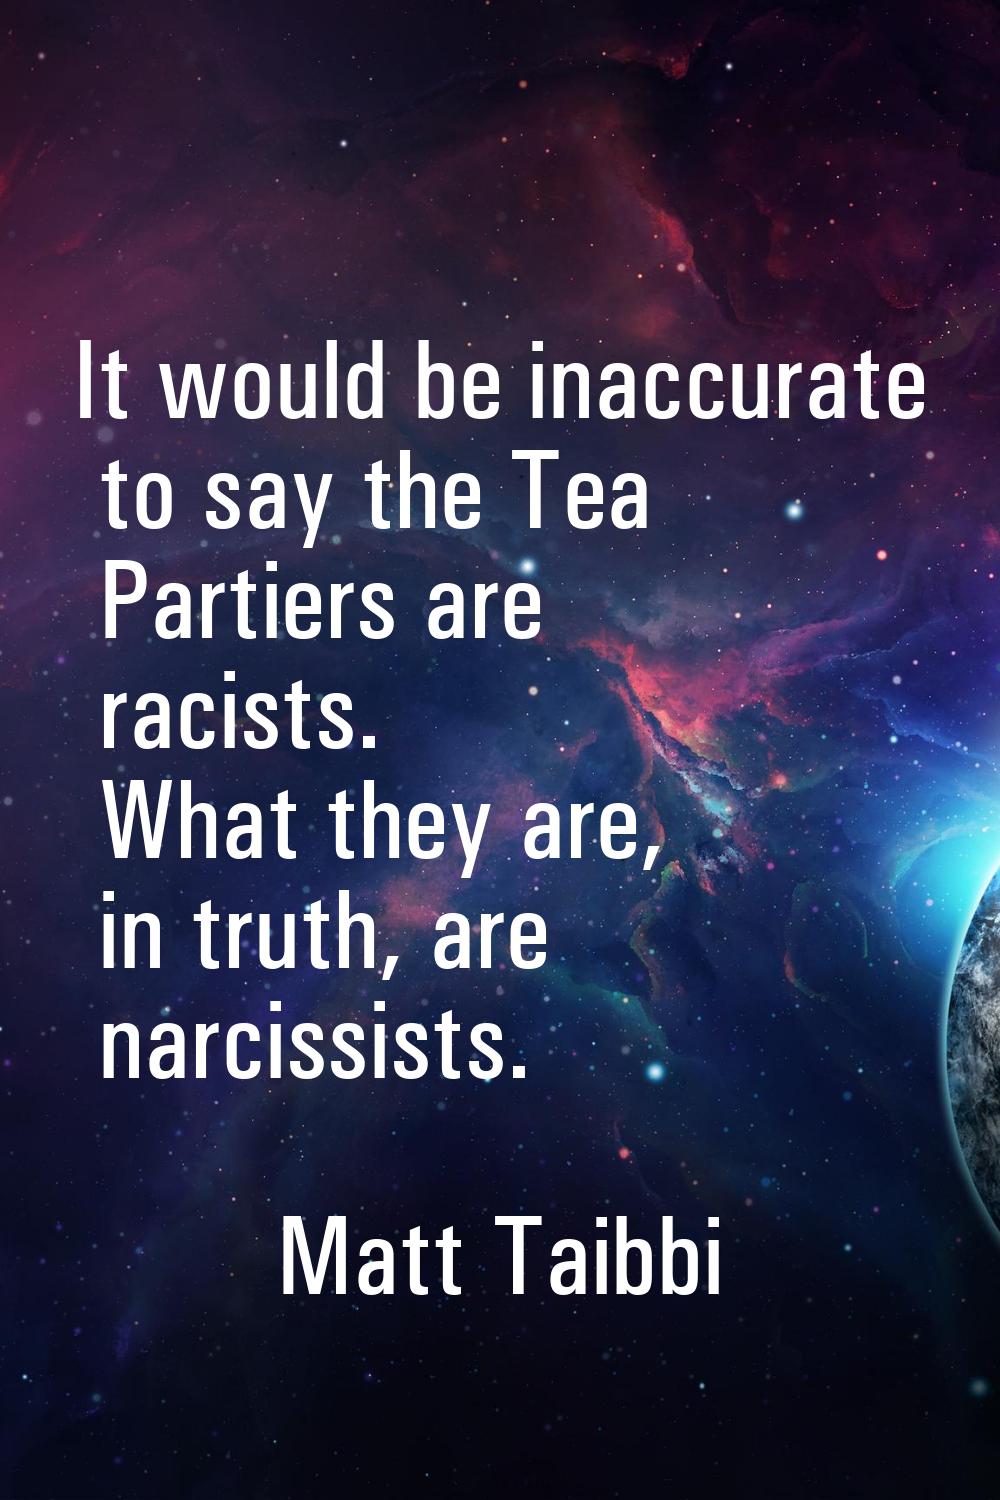 It would be inaccurate to say the Tea Partiers are racists. What they are, in truth, are narcissist